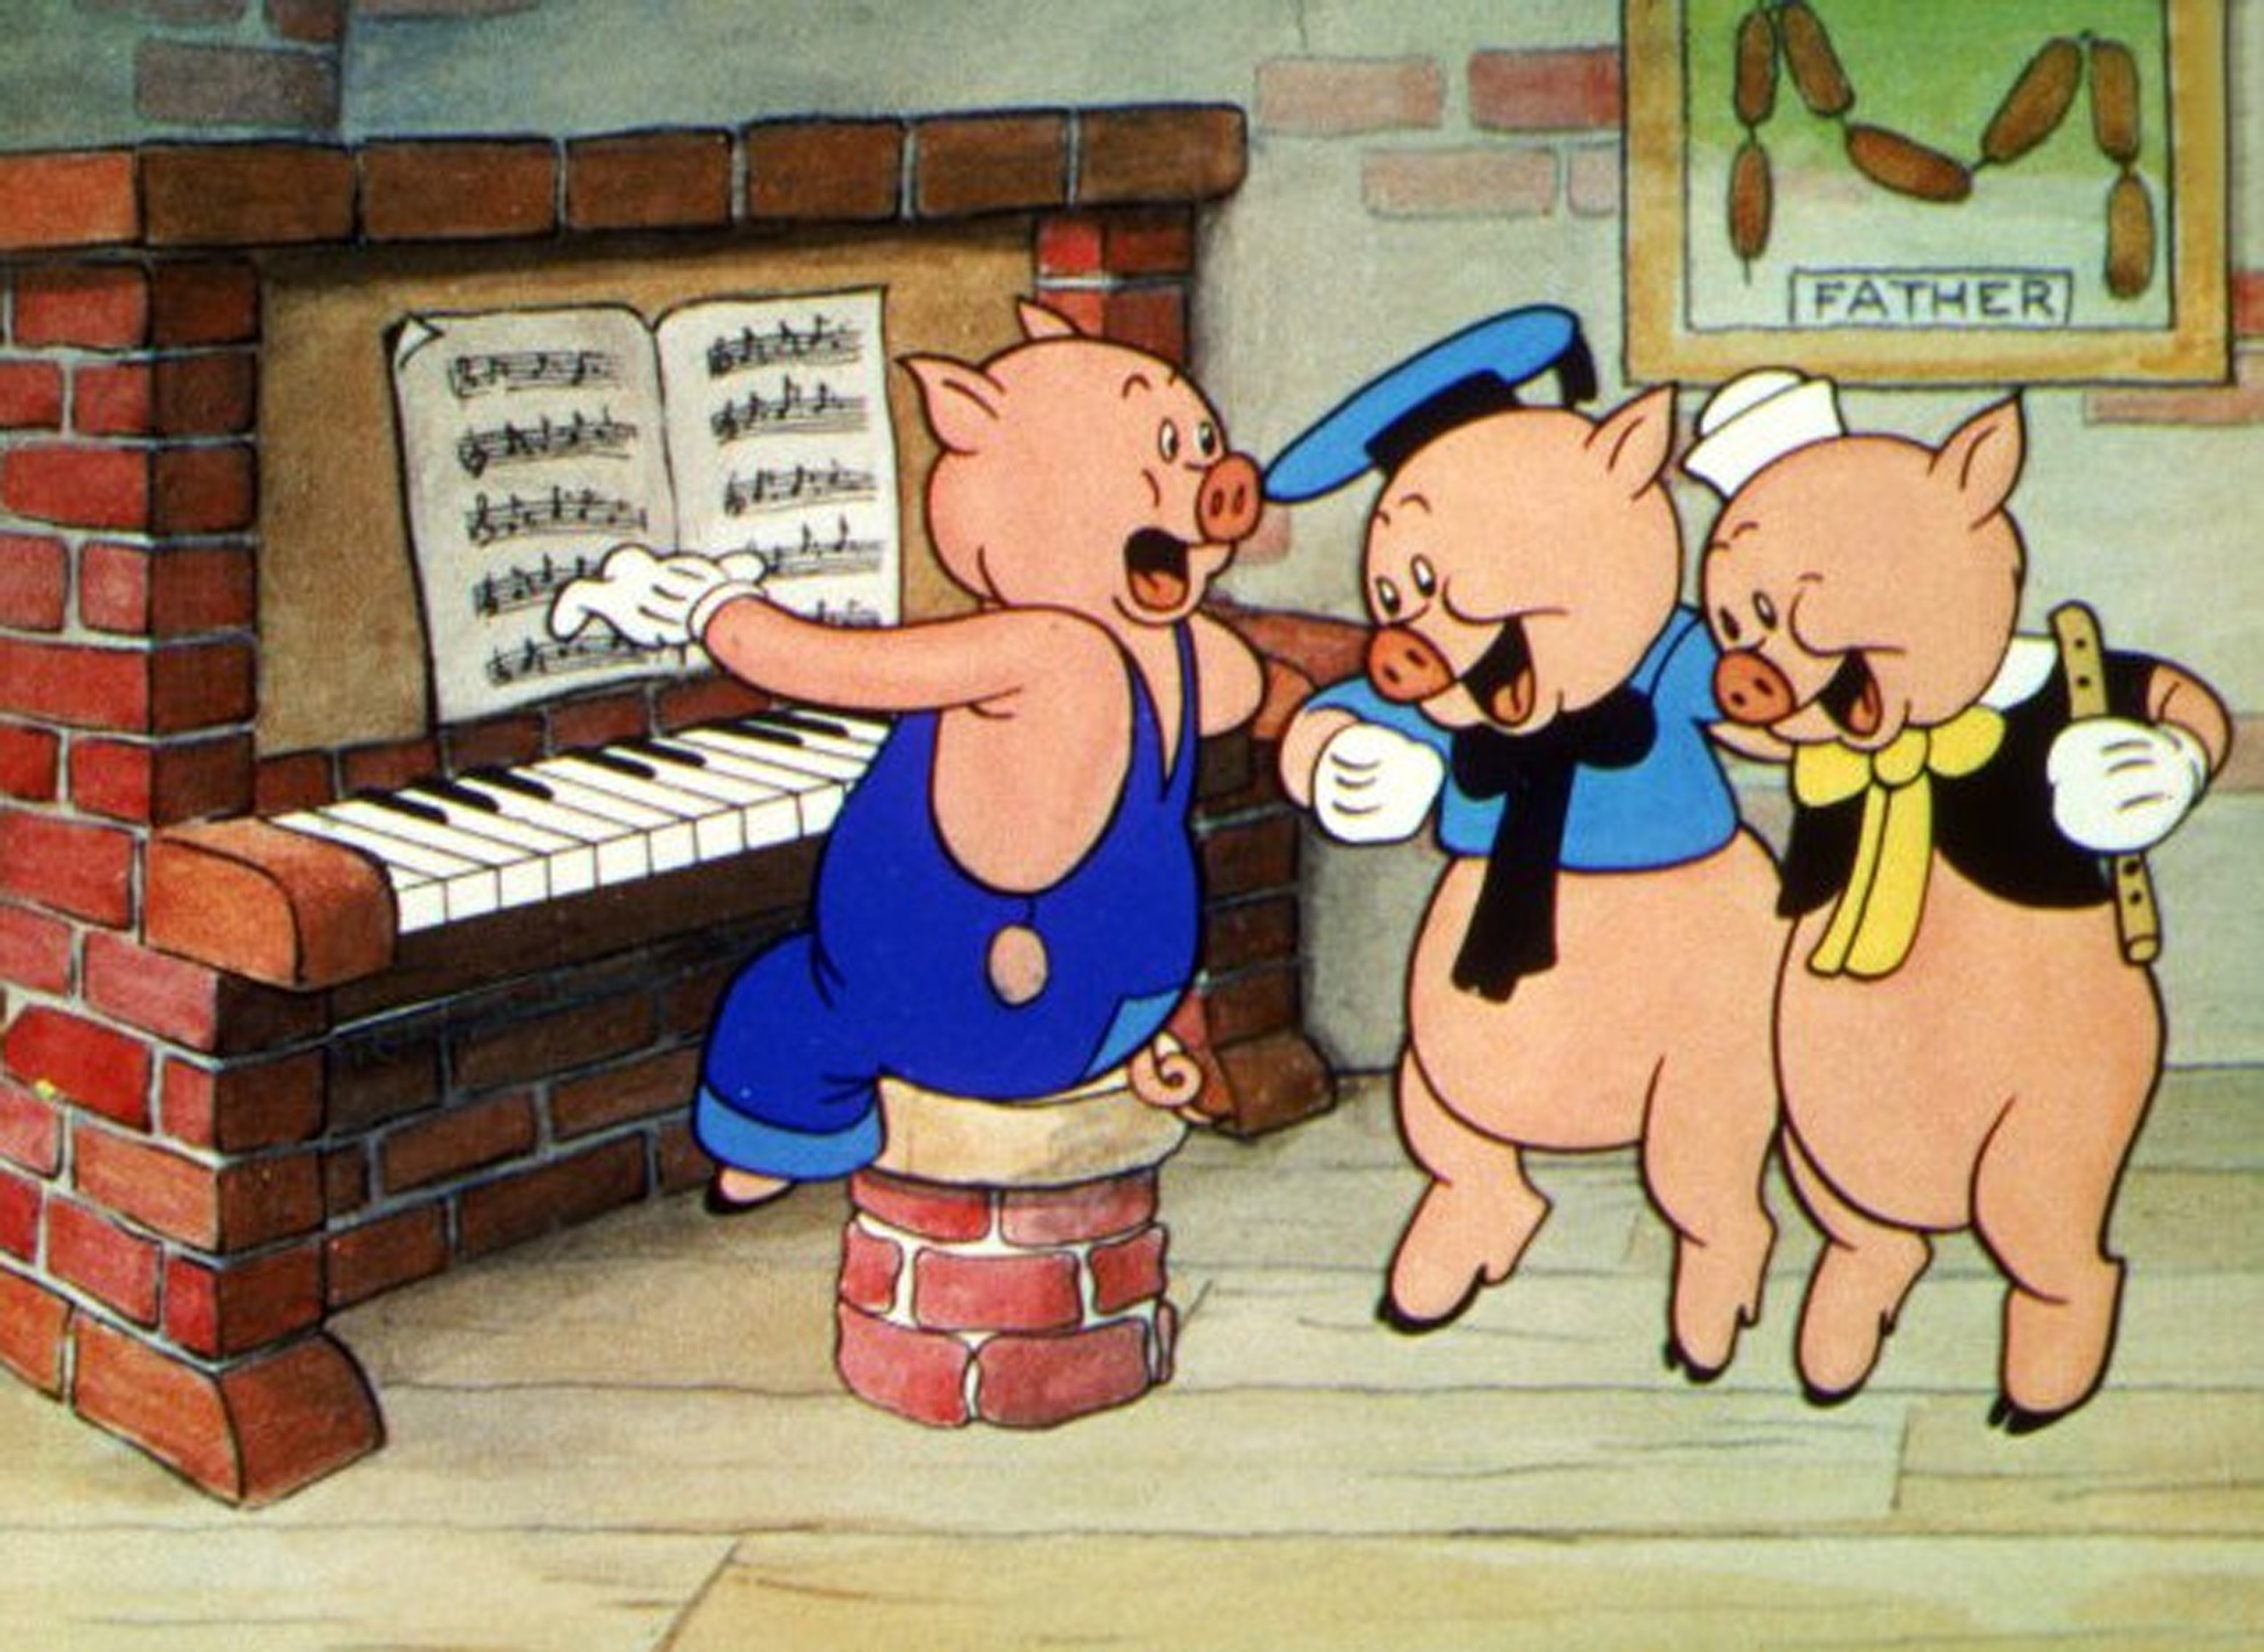 “Three Little Pigs” can be used to allegorise the behaviour of some families who send their children to learn Mandarin as a second language.